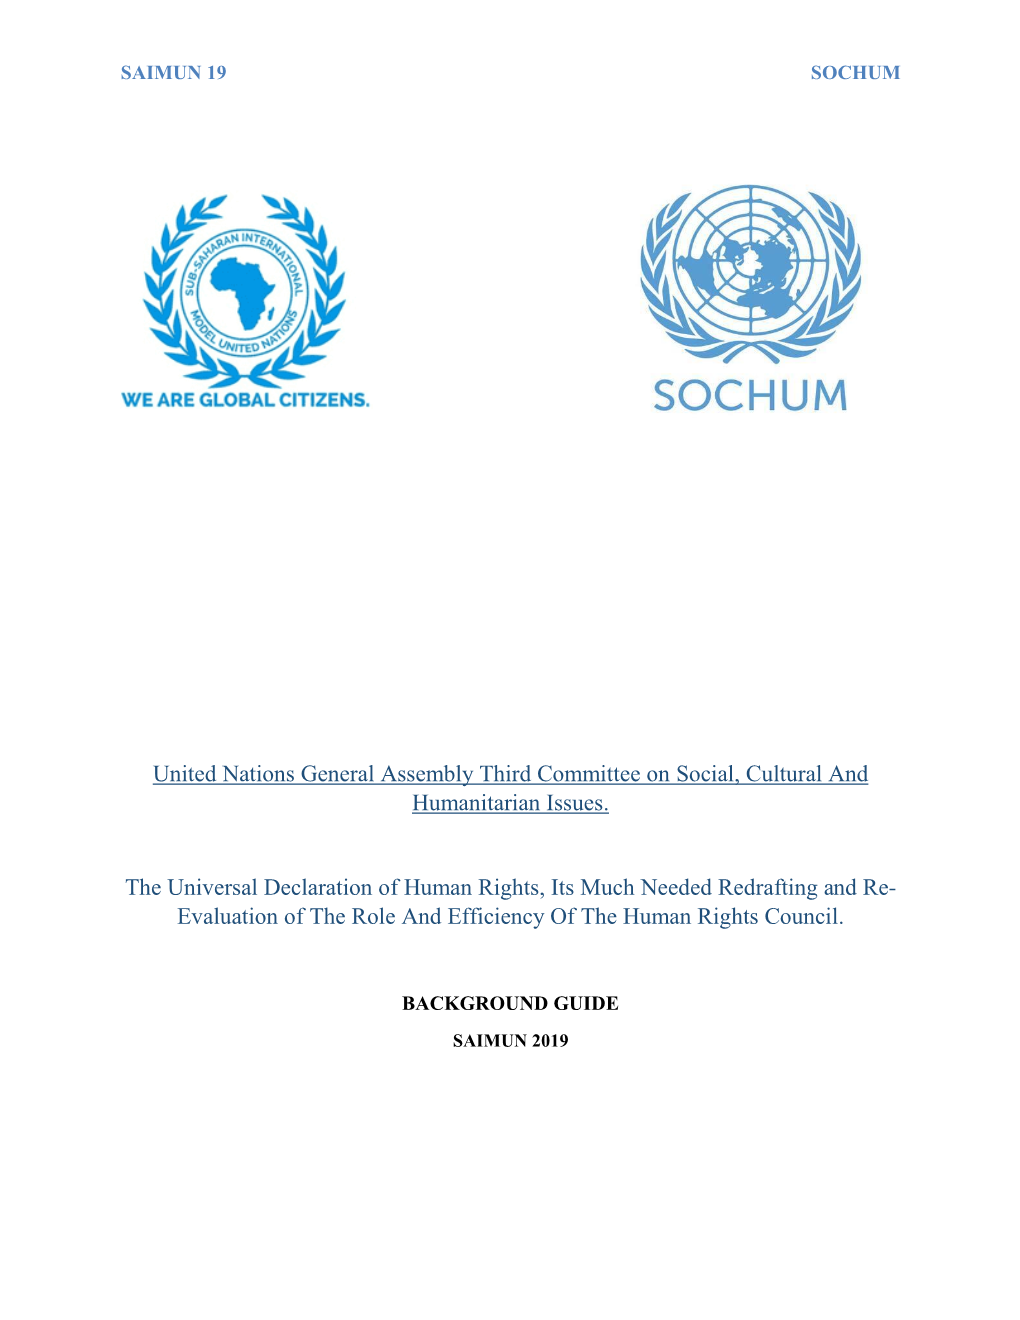 United Nations General Assembly Third Committee on Social, Cultural and Humanitarian Issues